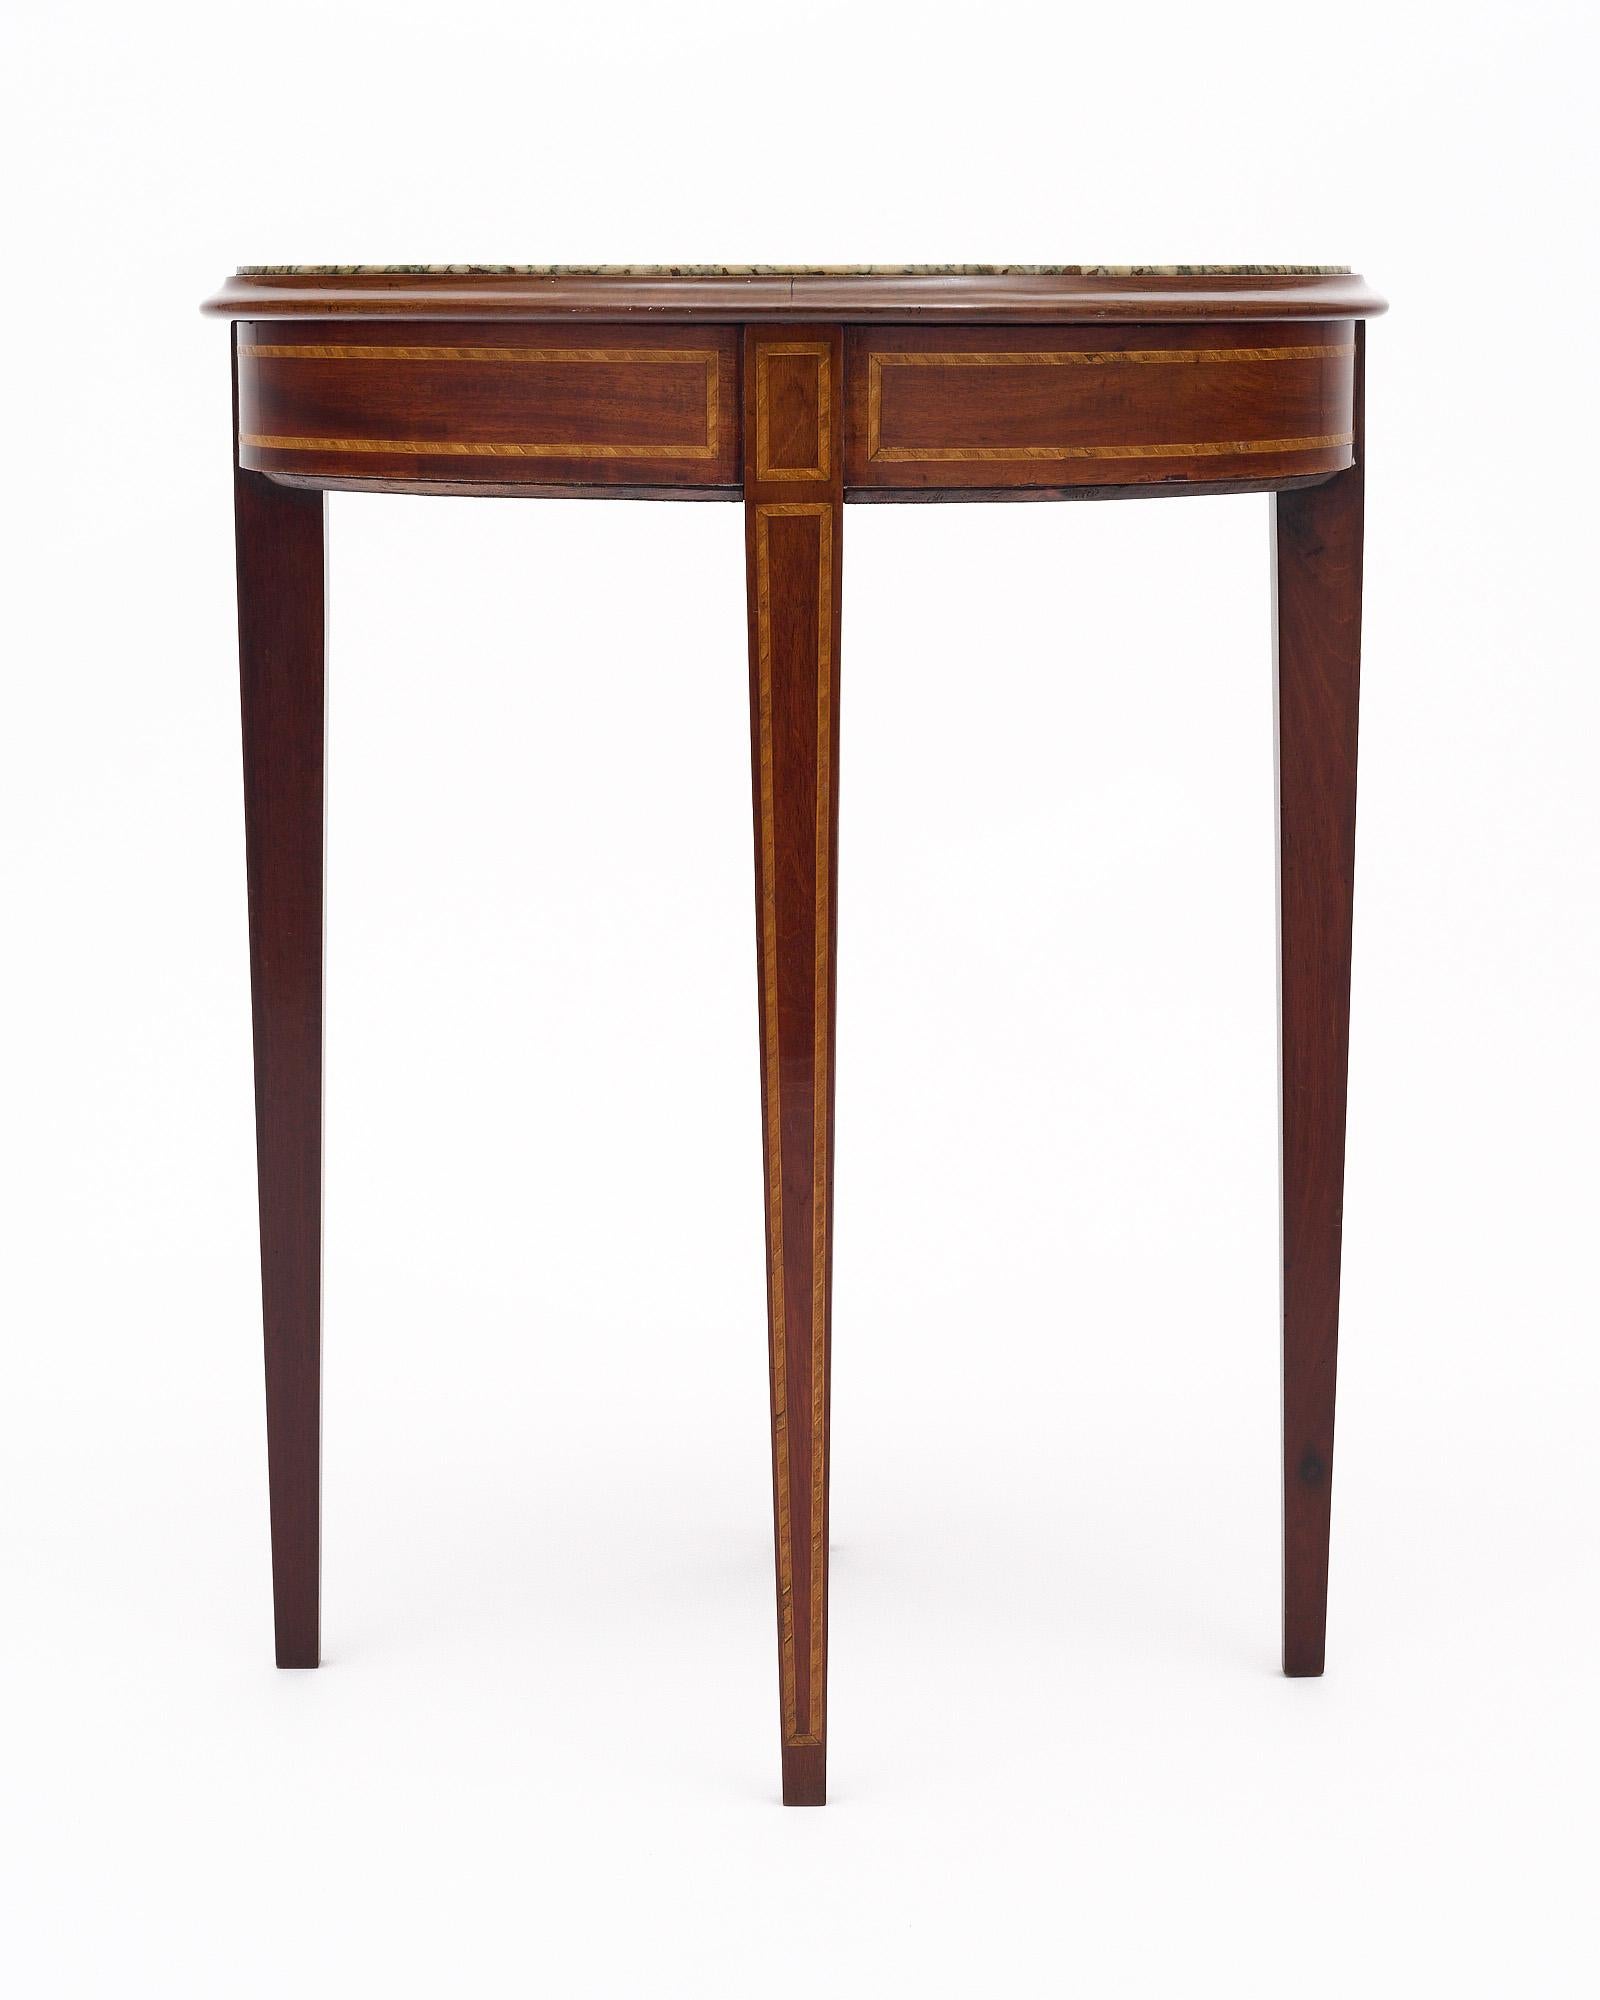 Geuridon side table in the Louis XVI style from France. This piece is made of mahogany and features inlay for a classic design. It is finished with a lustrous French polish of museum quality. Atop the piece sits an original marble top.
